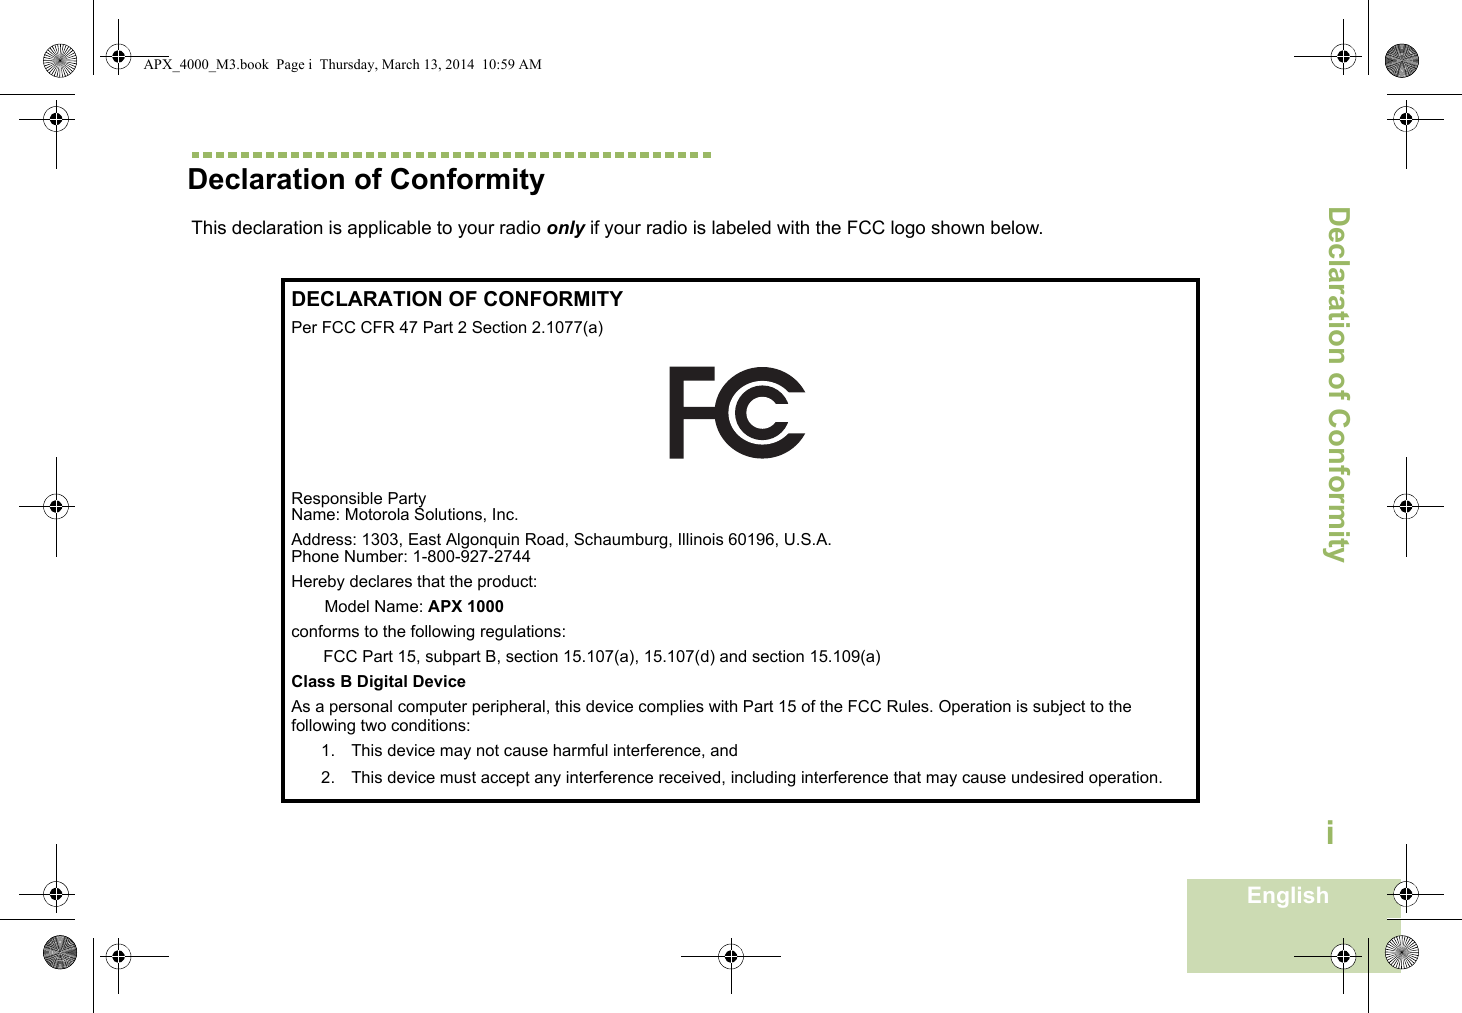 Declaration of ConformityEnglishiDeclaration of ConformityThis declaration is applicable to your radio only if your radio is labeled with the FCC logo shown below.DECLARATION OF CONFORMITYPer FCC CFR 47 Part 2 Section 2.1077(a)Responsible Party Name: Motorola Solutions, Inc.Address: 1303, East Algonquin Road, Schaumburg, Illinois 60196, U.S.A.Phone Number: 1-800-927-2744Hereby declares that the product:Model Name: APX 1000conforms to the following regulations:FCC Part 15, subpart B, section 15.107(a), 15.107(d) and section 15.109(a)Class B Digital DeviceAs a personal computer peripheral, this device complies with Part 15 of the FCC Rules. Operation is subject to the following two conditions:1. This device may not cause harmful interference, and 2. This device must accept any interference received, including interference that may cause undesired operation.APX_4000_M3.book  Page i  Thursday, March 13, 2014  10:59 AM